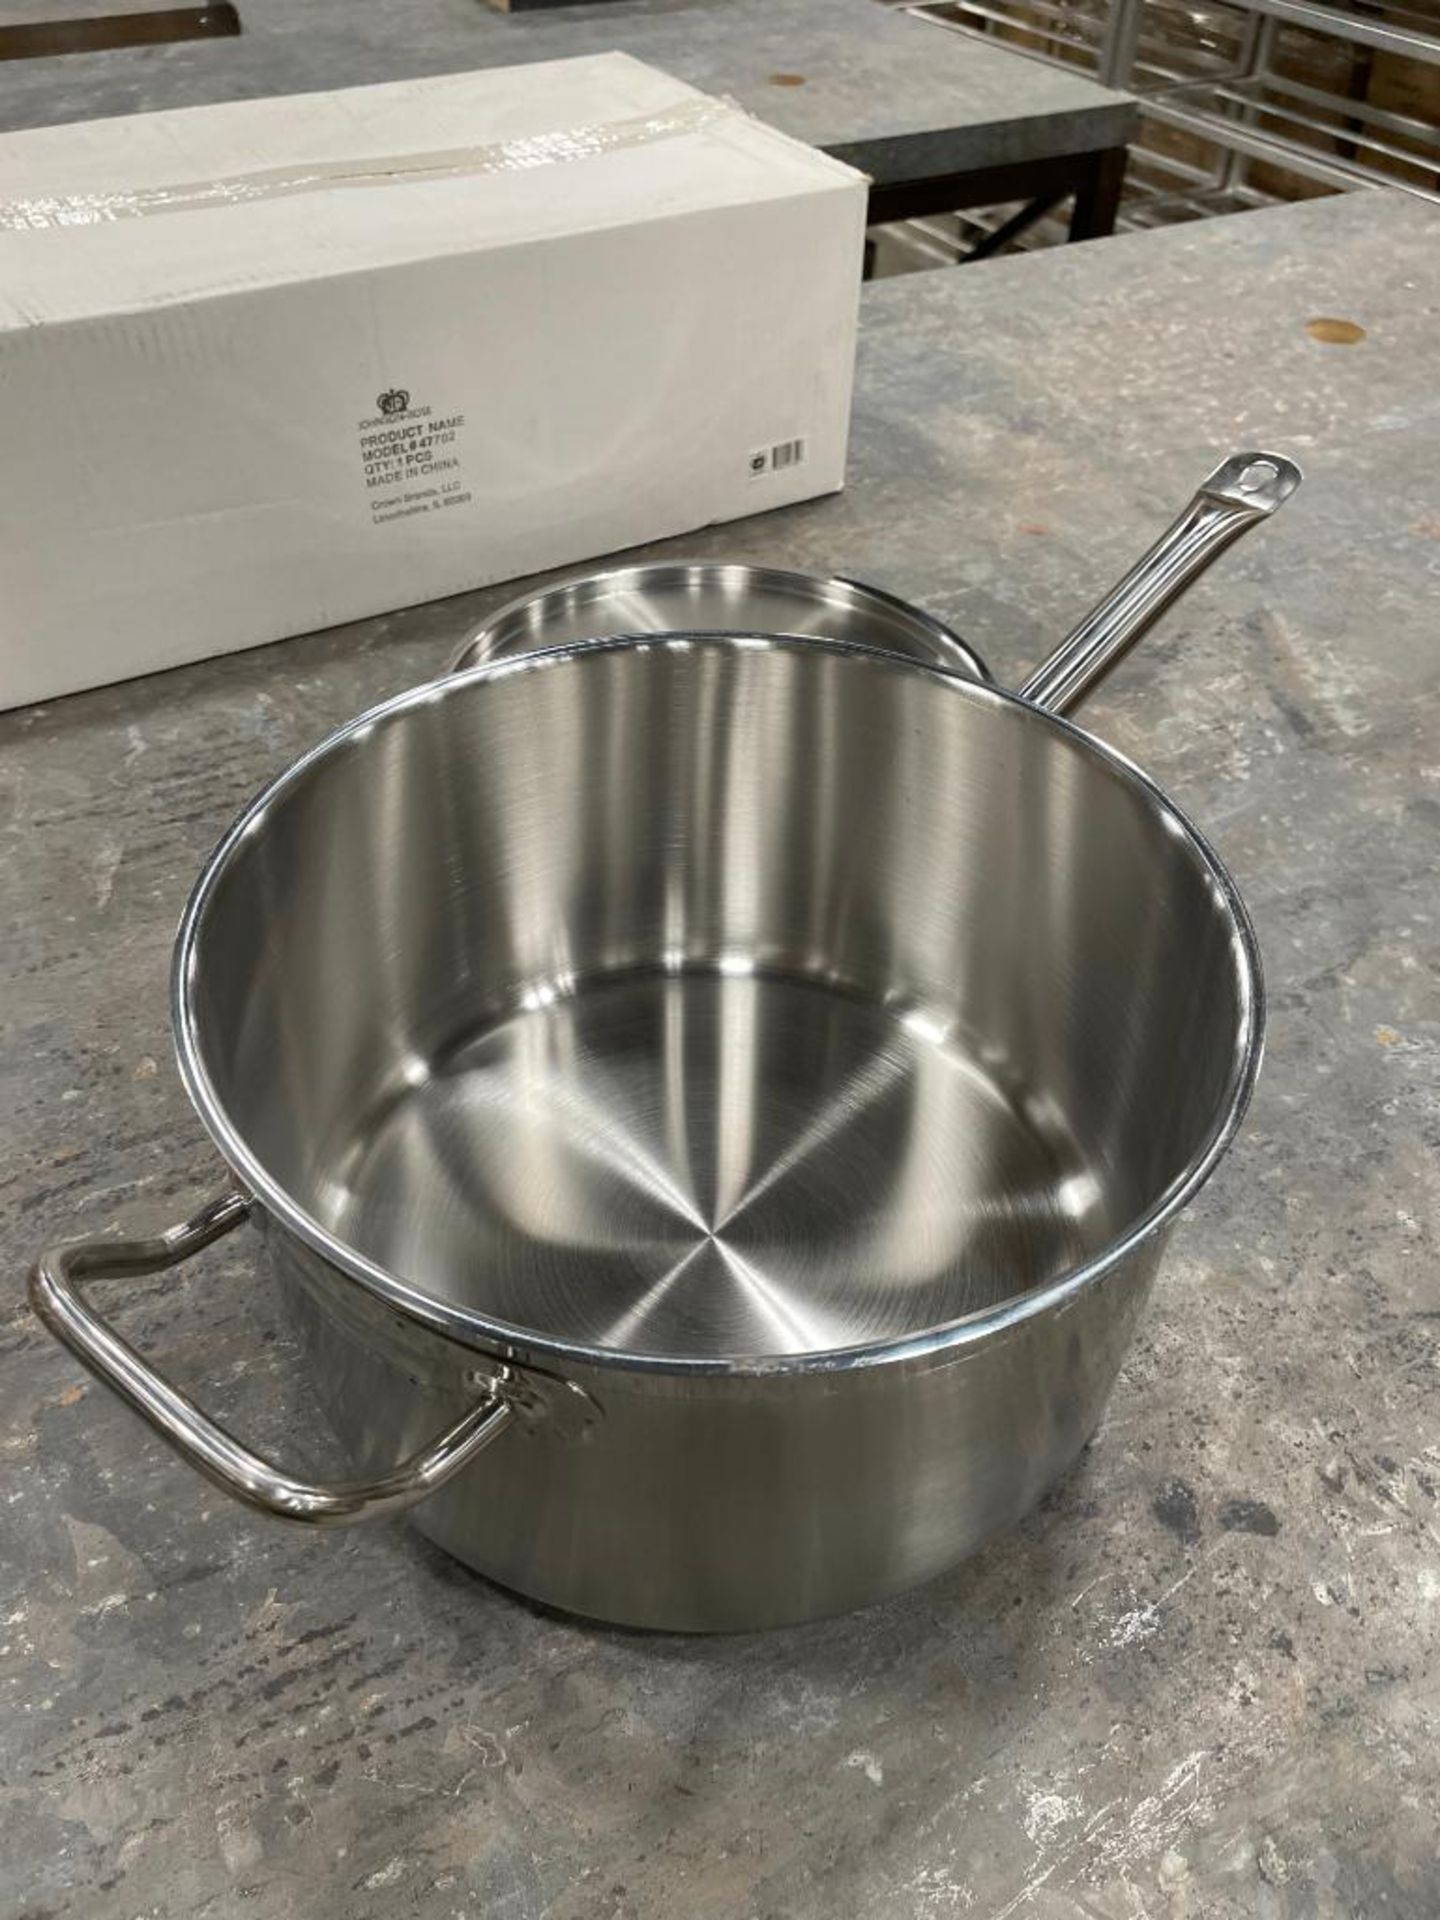 10QT HEAVY DUTY STAINLESS SAUCE PAN INDUCTION CAPABLE, JR 47702- NEW - Image 4 of 7